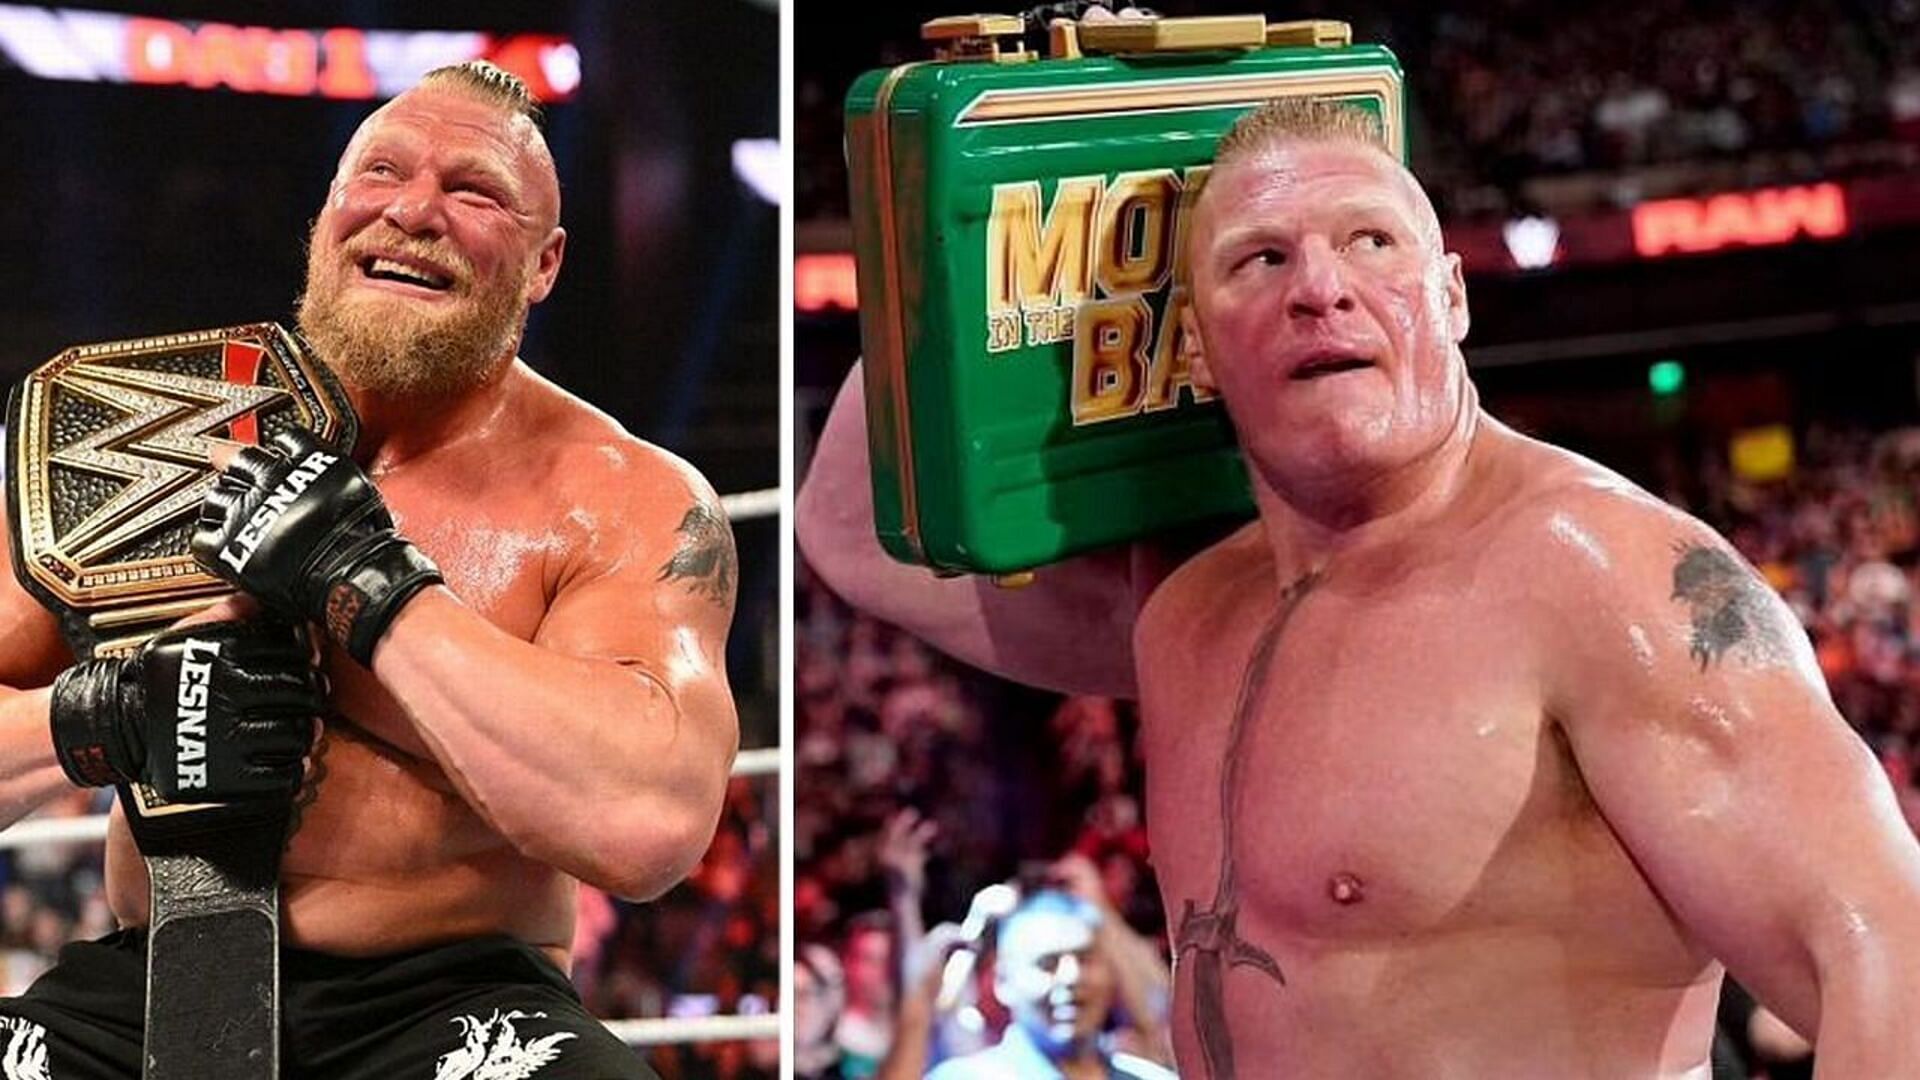 Brock Lesnar will battle Roman Reigns in a title unification match at WrestleMania